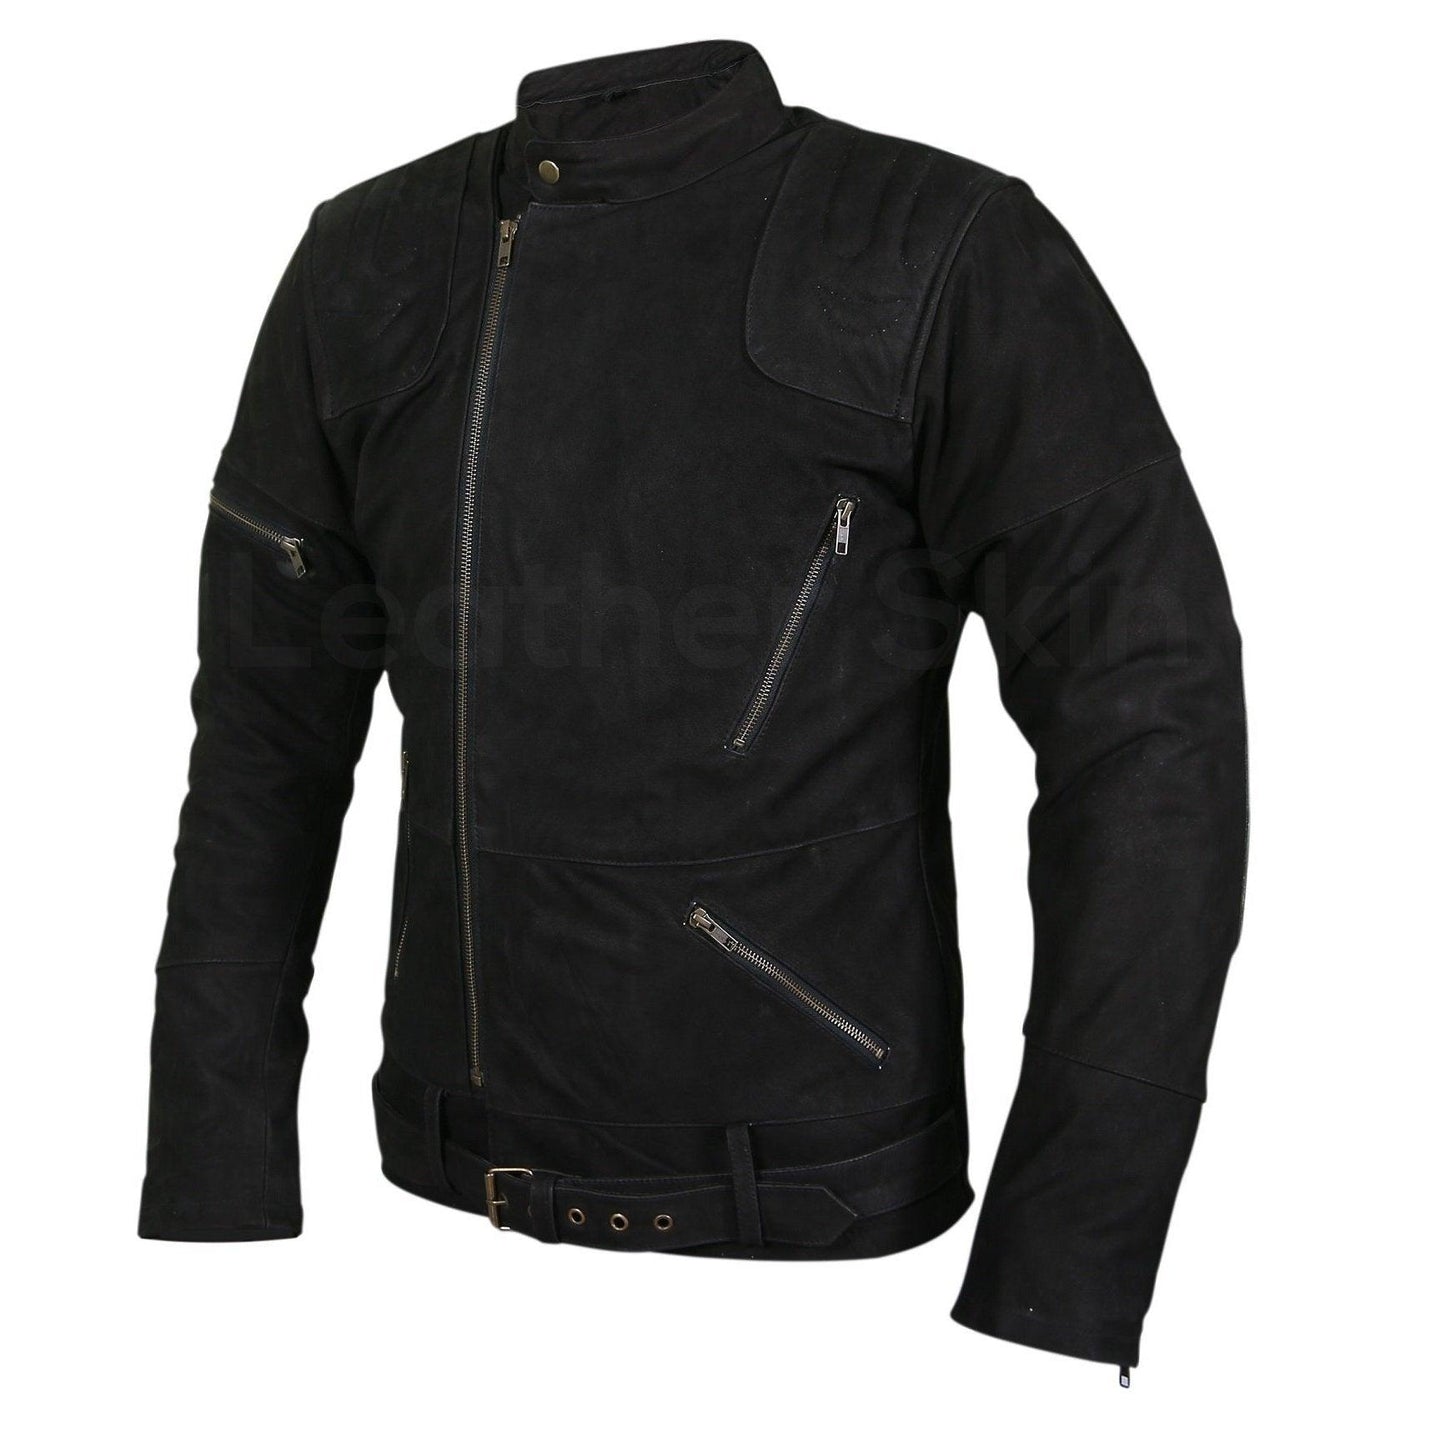 Men's Black Suede Belted Western Leather Jacket with Zippers on Shoulders